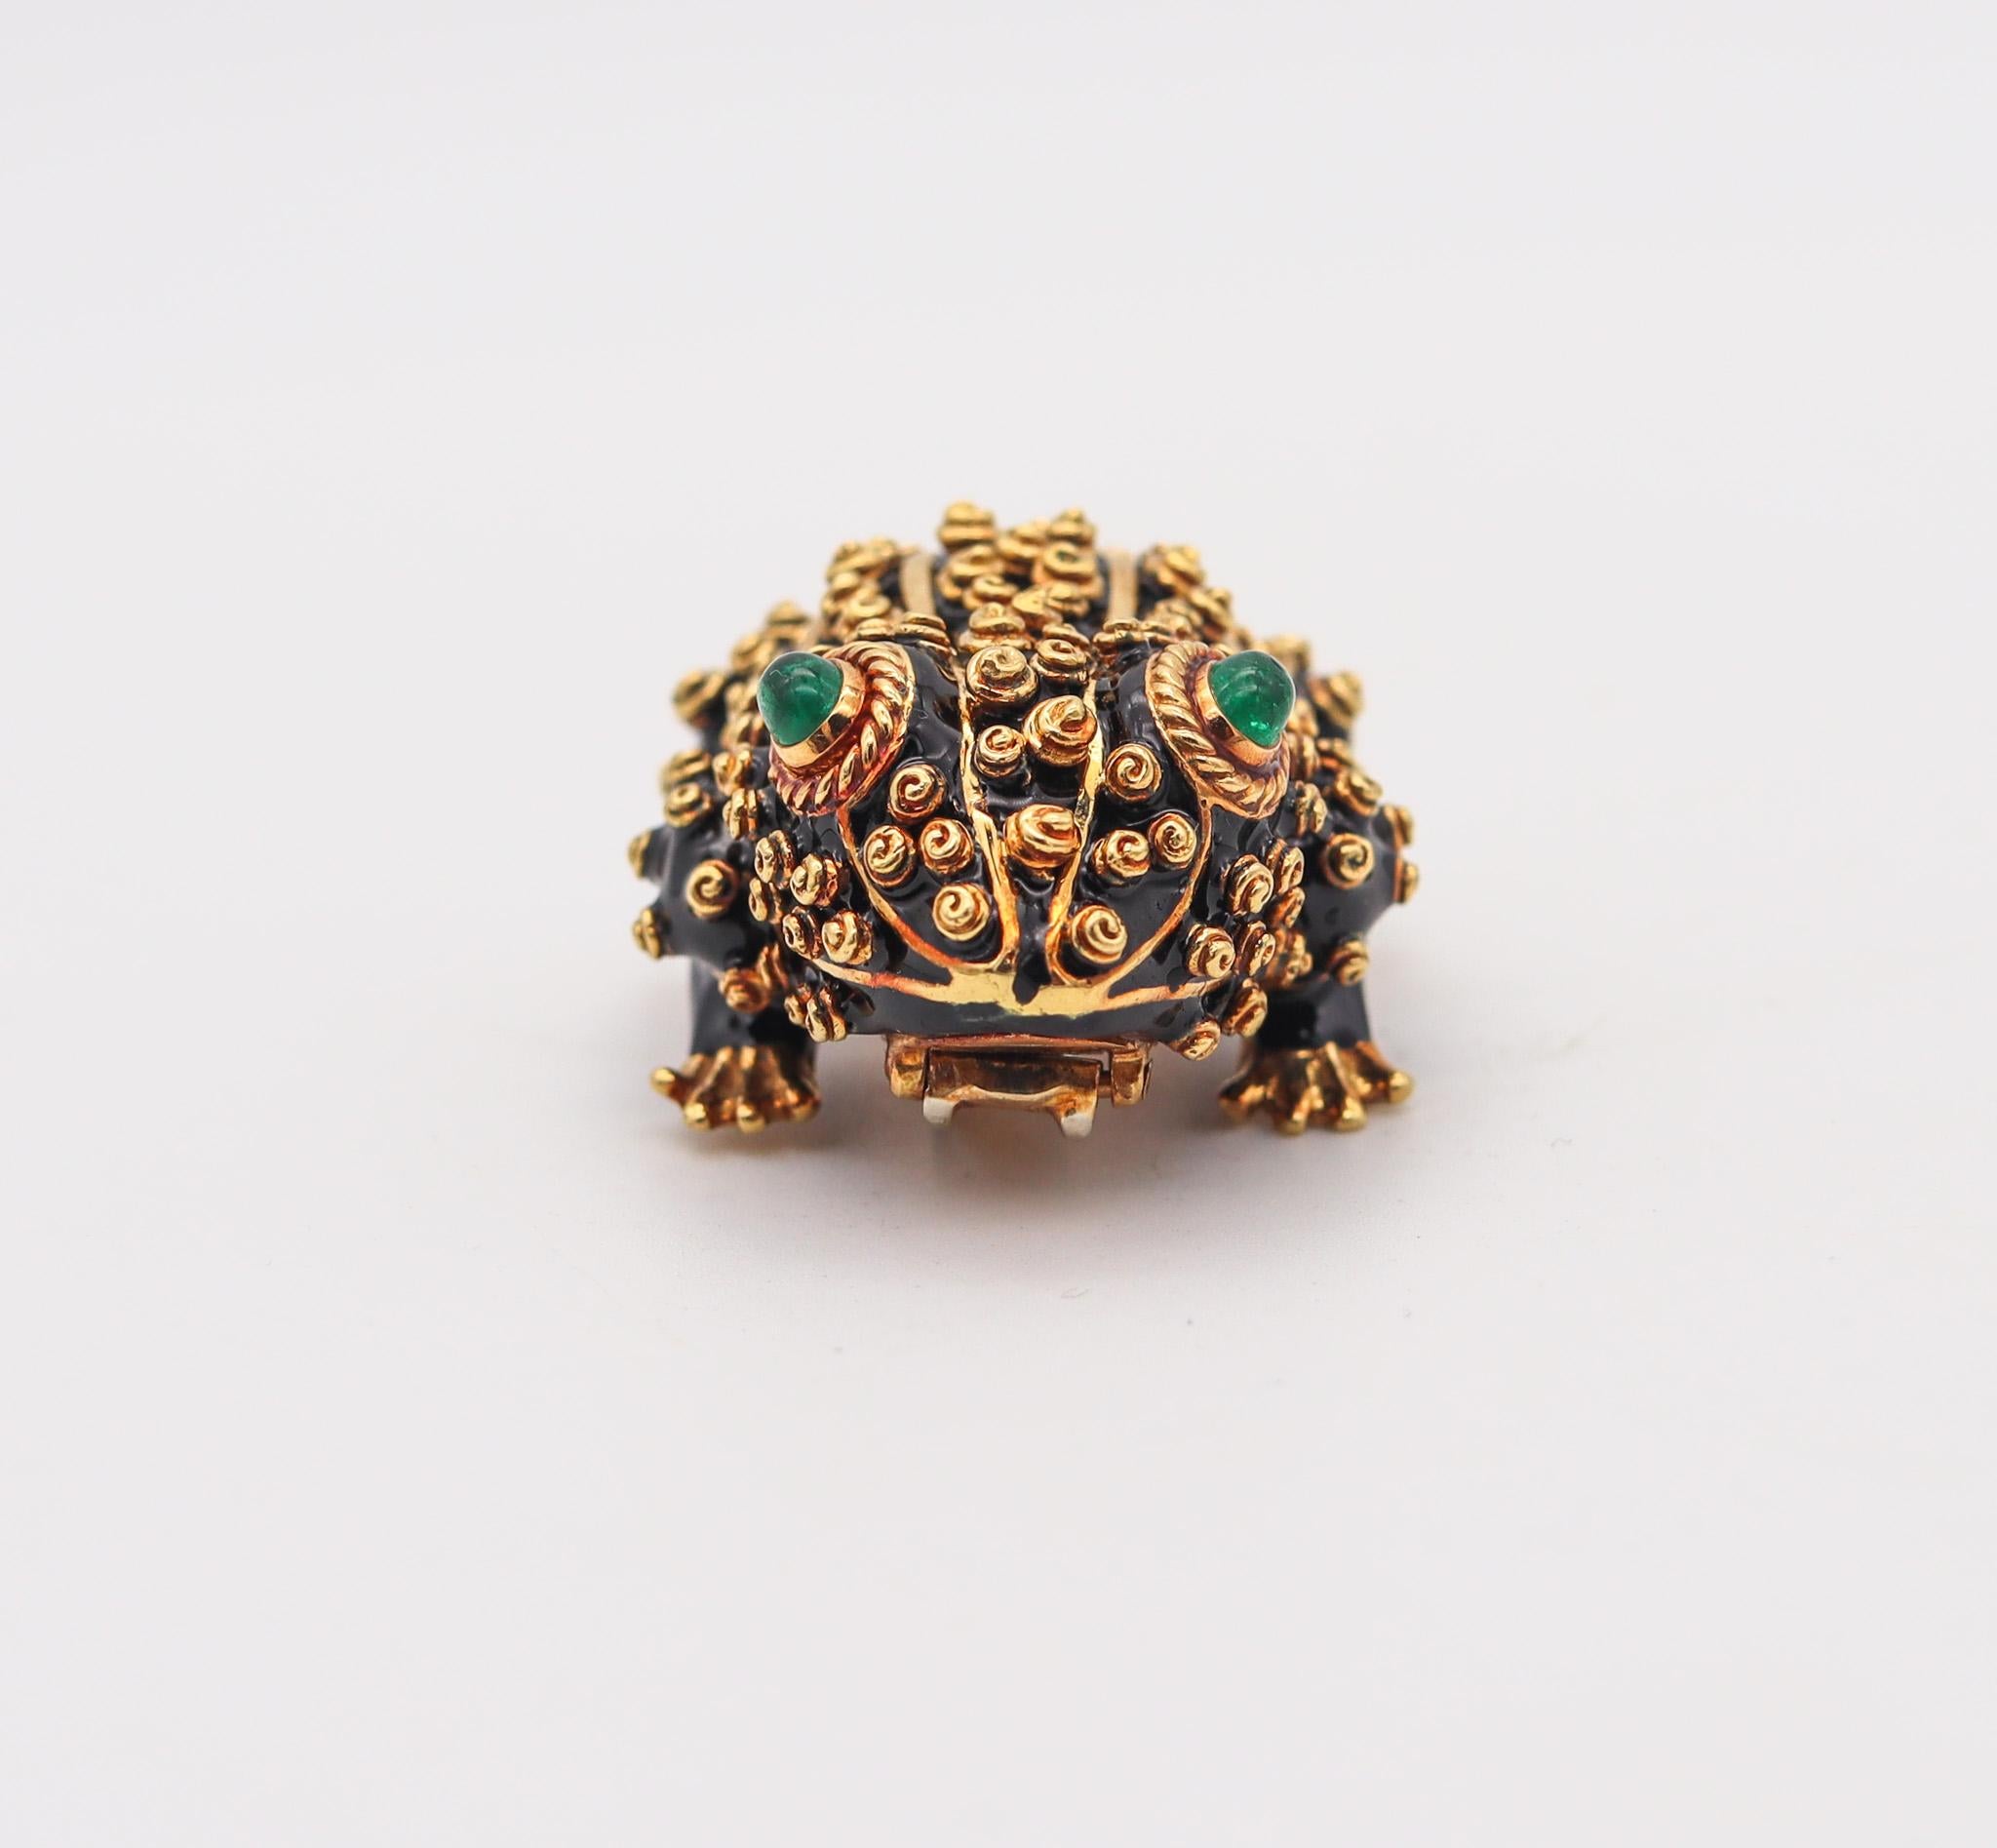 A frog brooch designed by David Webb (1925-1975).

An exceptional and iconic vintage frog brooch, created in New York city back in the 1970 at the jewelry atelier of David Webb. This statement brooch was carefully crafted in three dimensions in